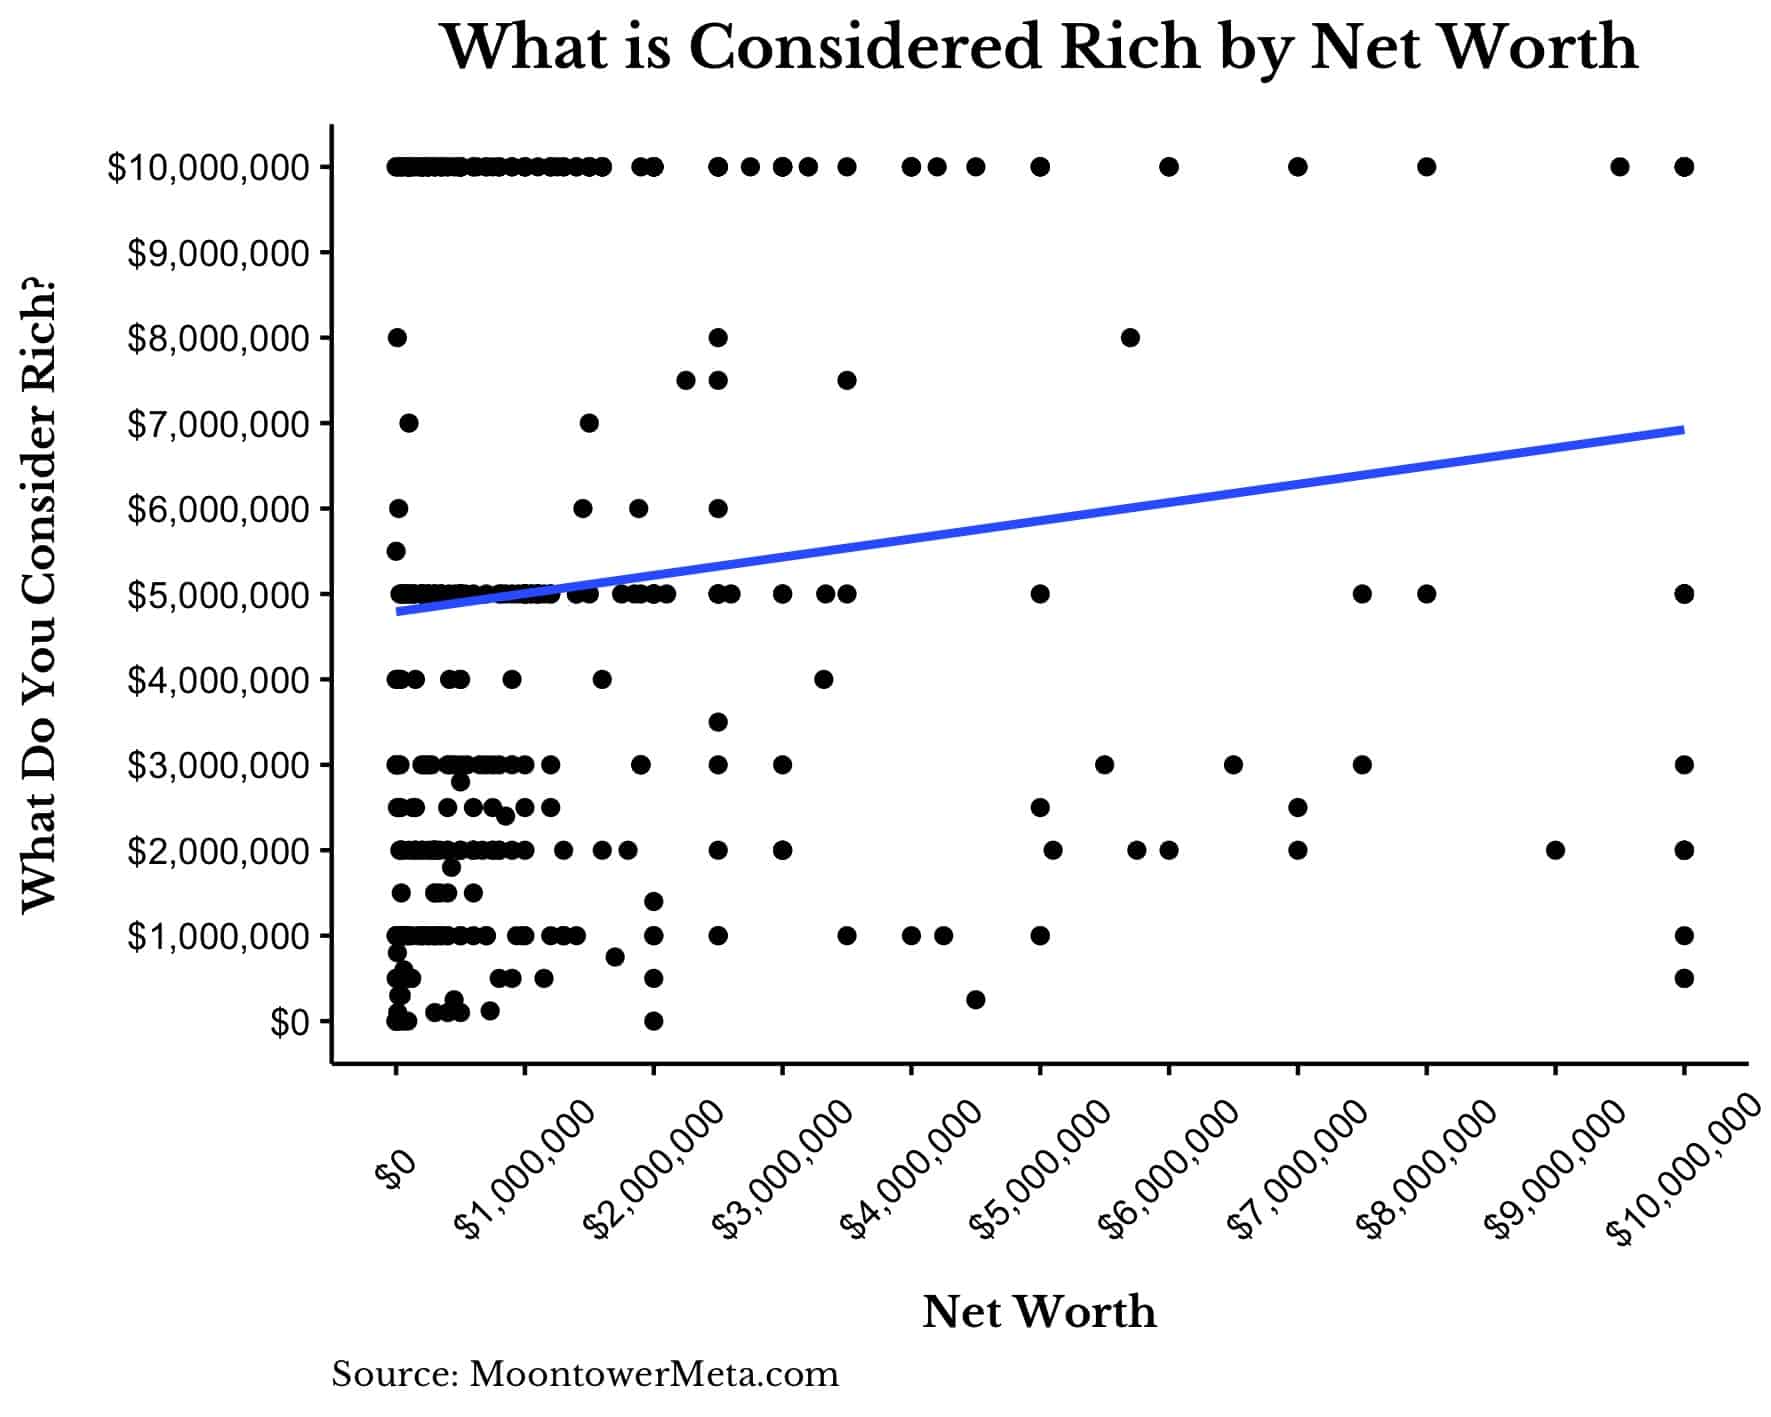 What is considered rich by net worth from MoontowerMeta.com survey